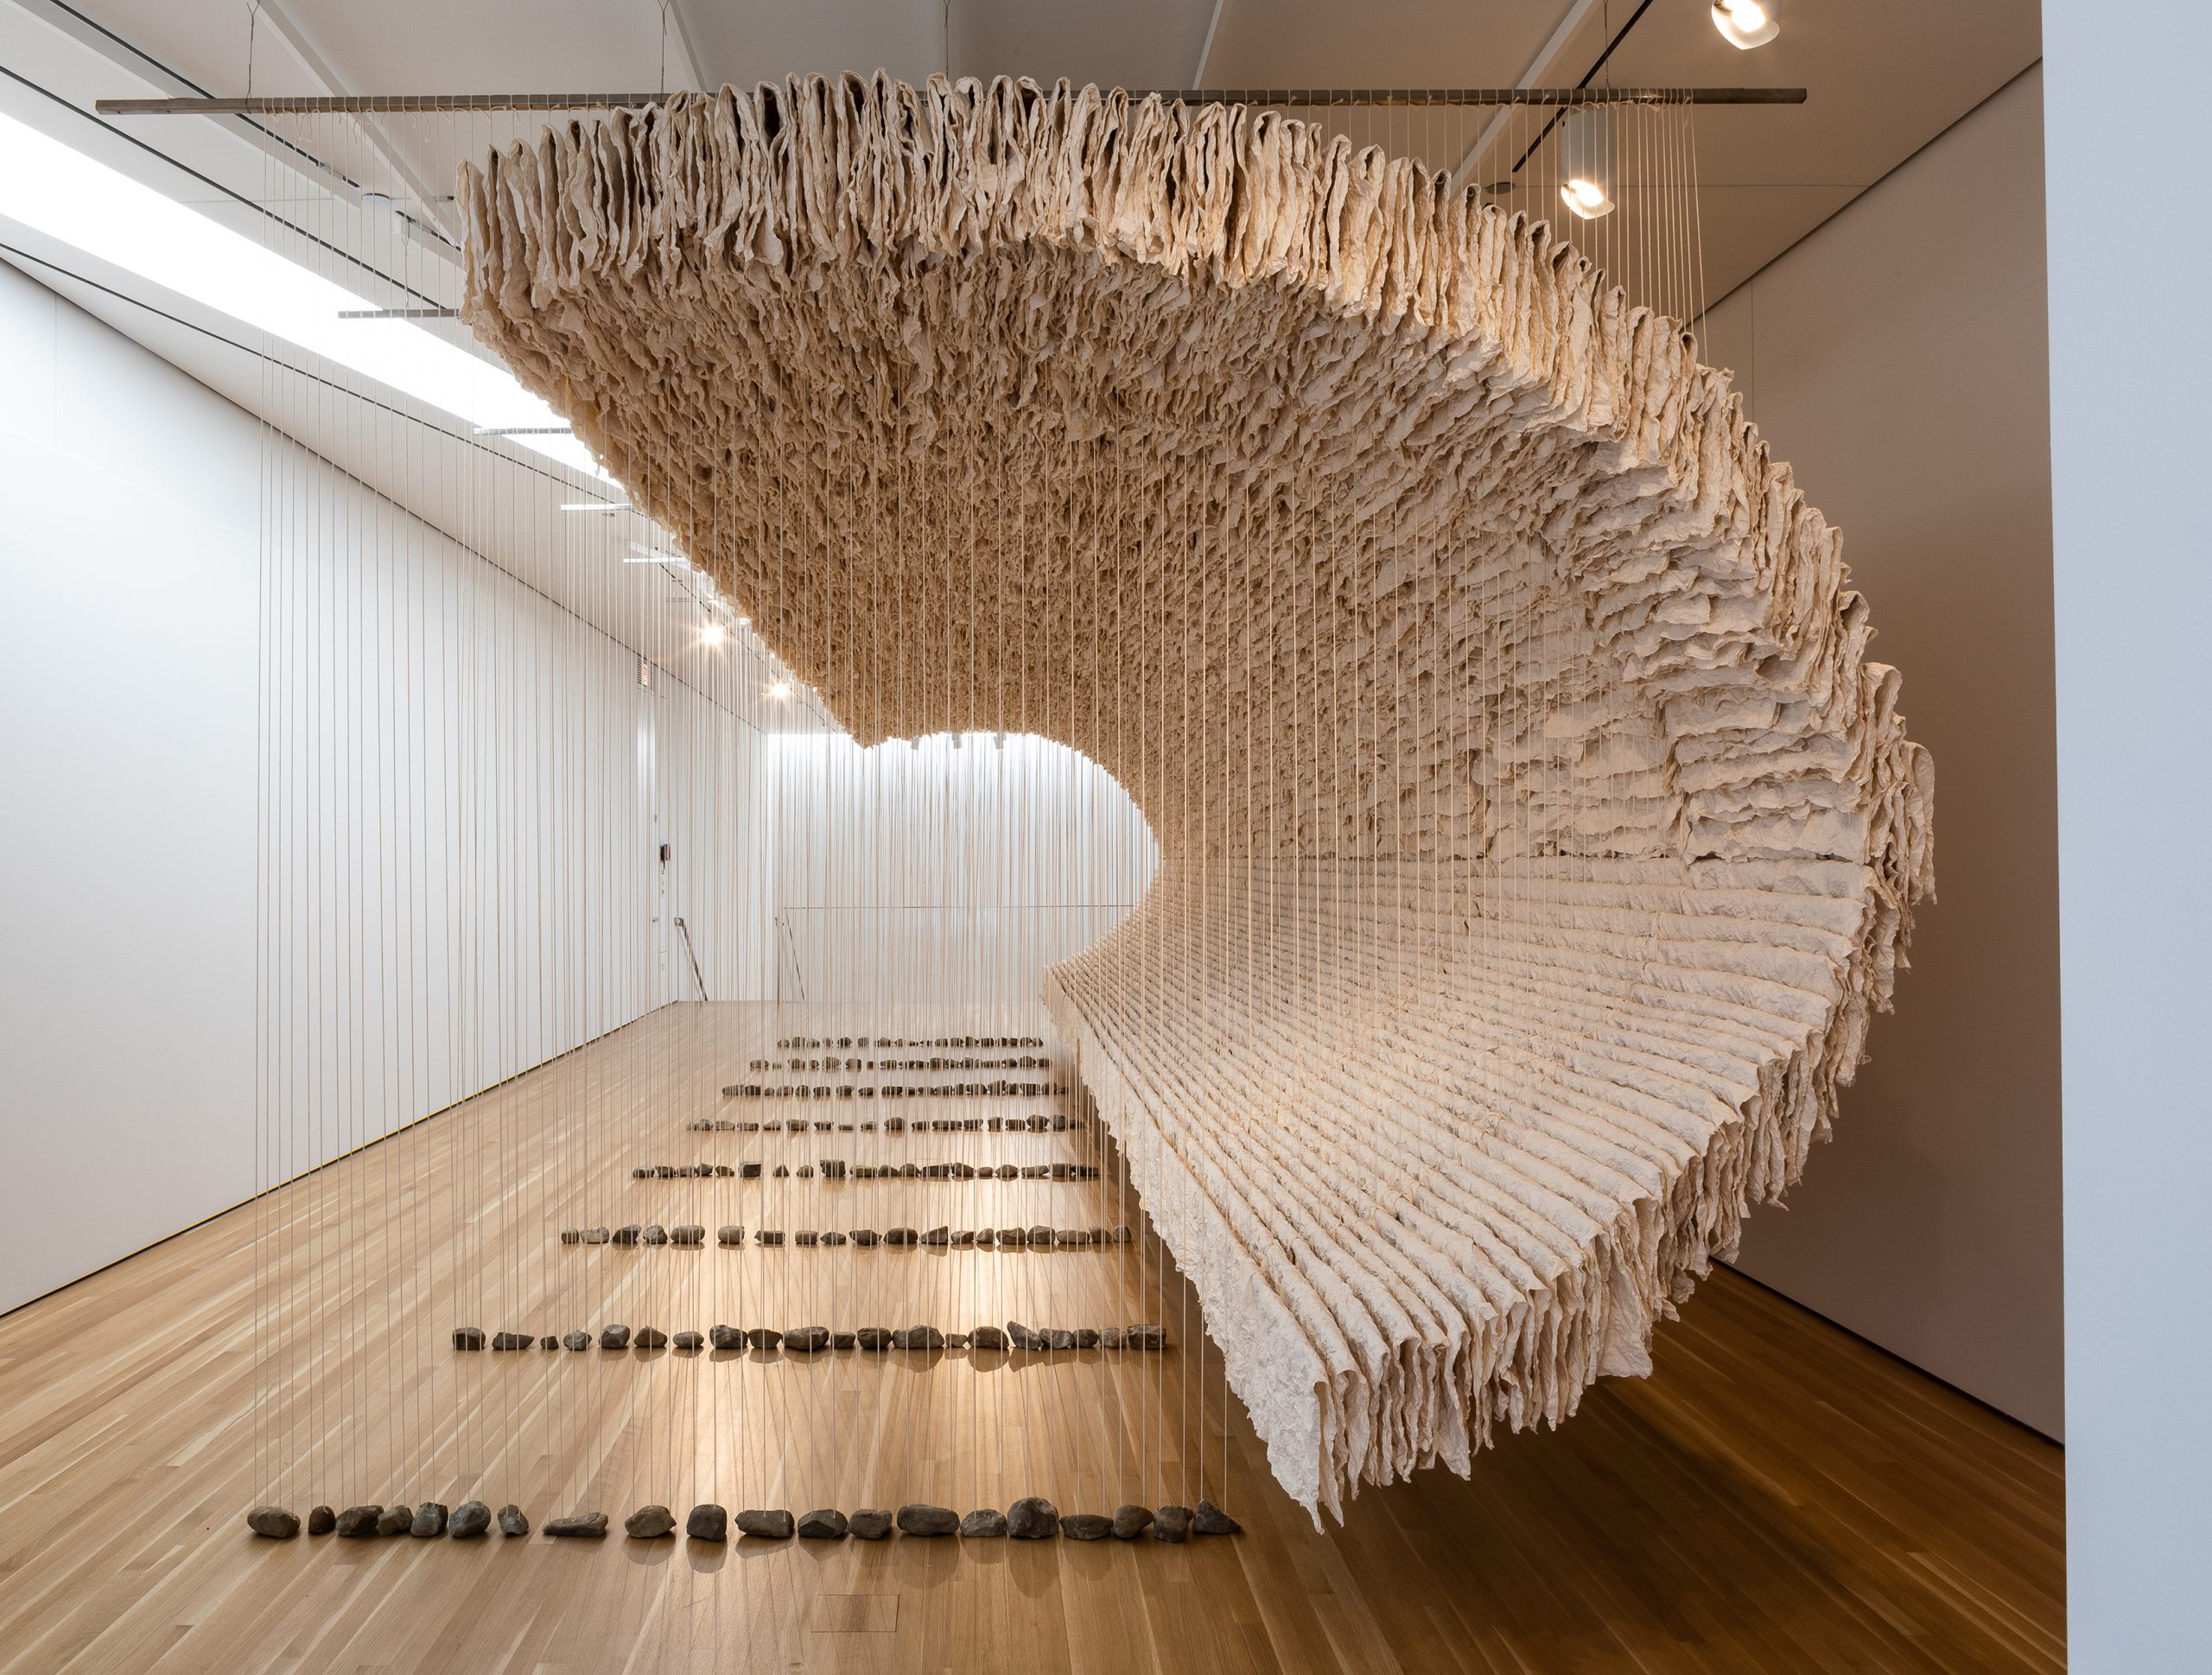 Zhu Jinshi, Wave of Materials, 2007/2020. Installation view, The Allure of Matter: Material Art from China, Wrightwood 659.